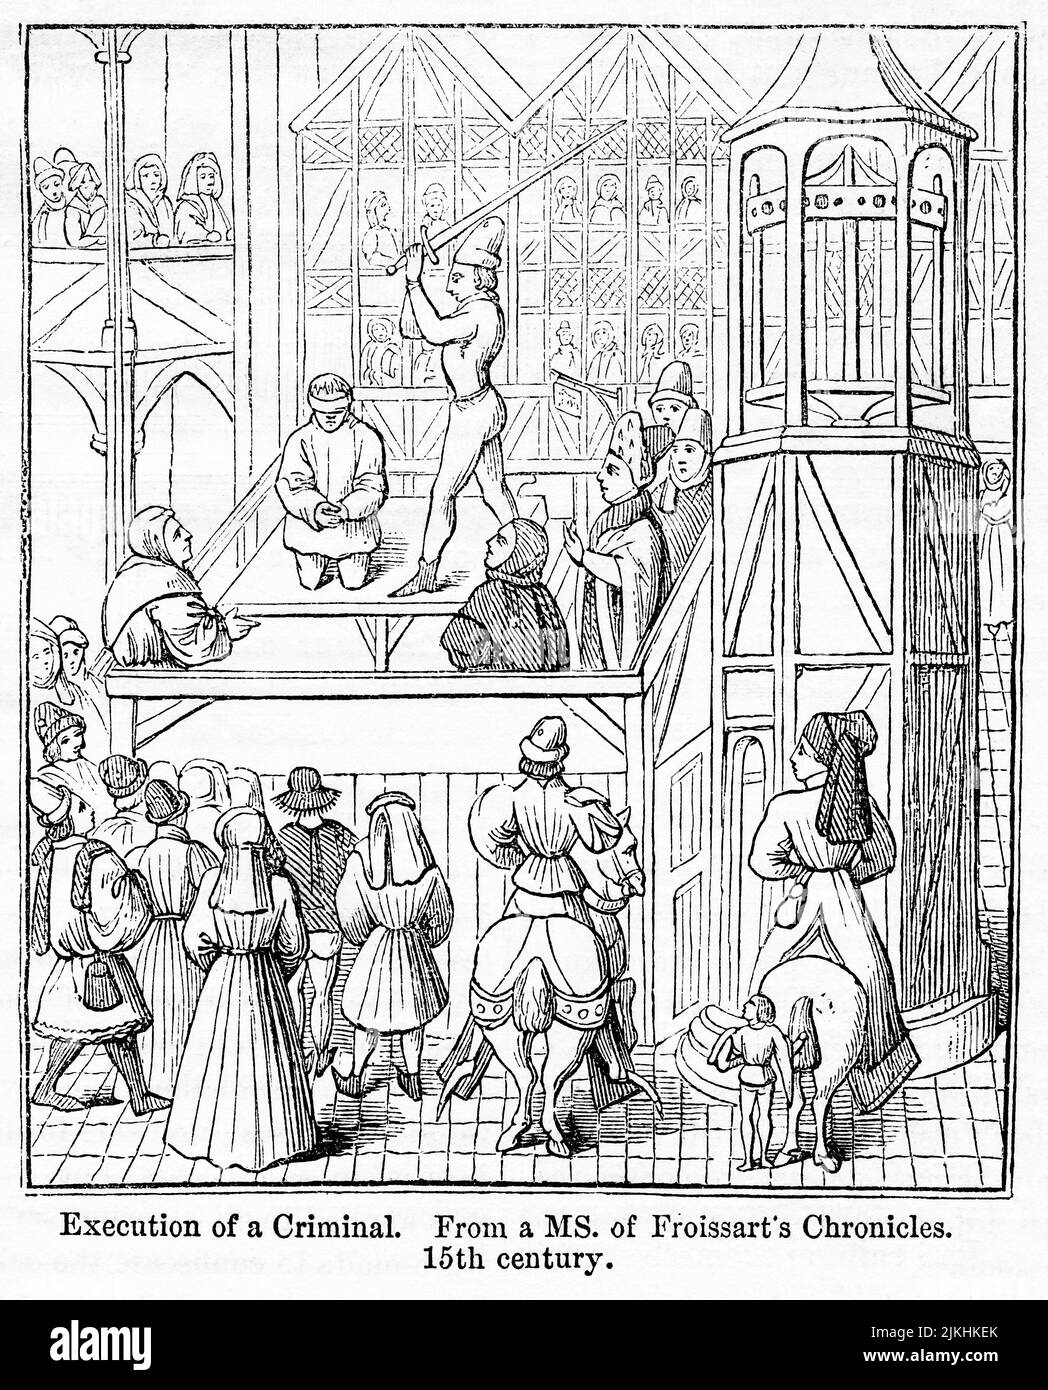 Execution of a Criminal, From a MS of Froissart's Chronicles, Fifteenth century, Illustration from the Book, 'John Cassel’s Illustrated History of England, Volume II', text by William Howitt, Cassell, Petter, and Galpin, London, 1858 Stock Photo